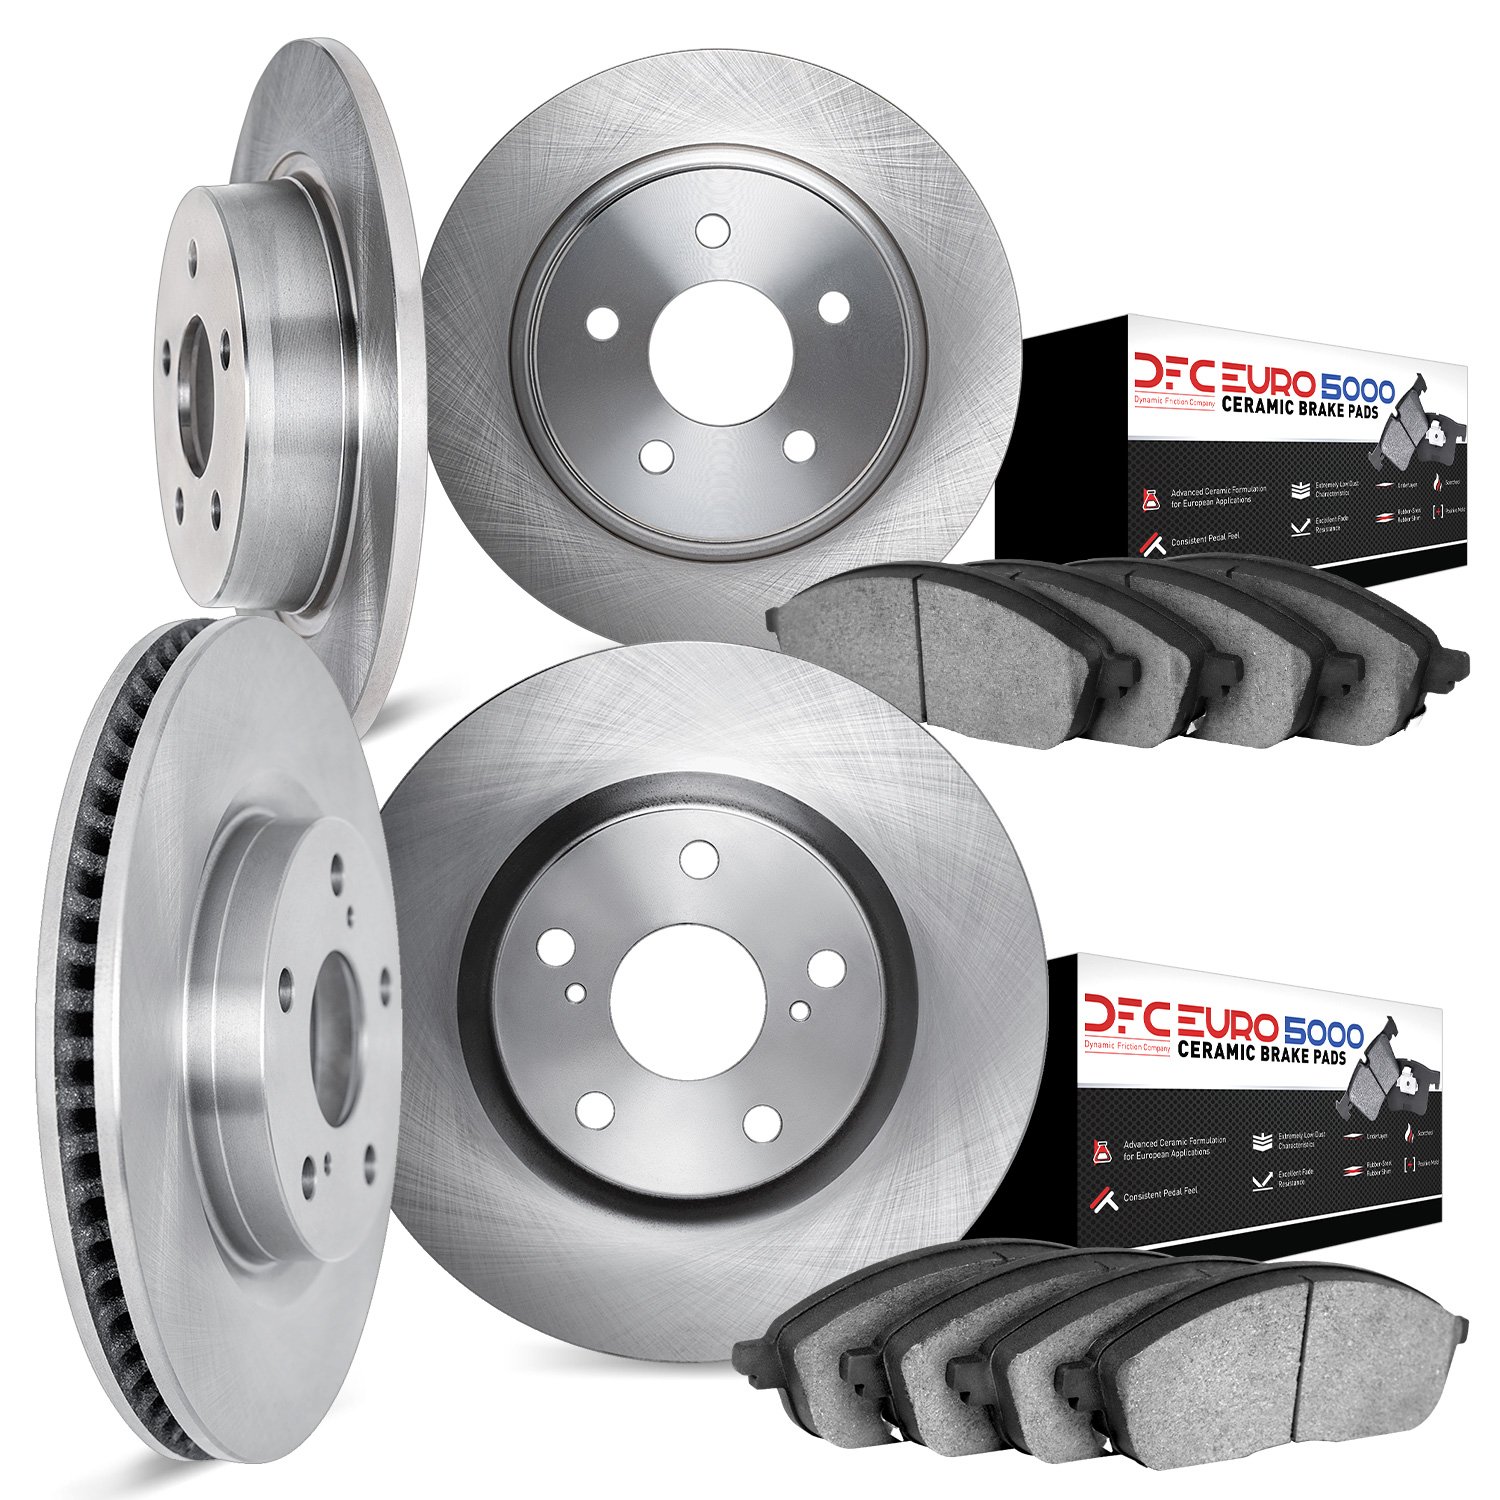 6604-63000 Brake Rotors w/5000 Euro Ceramic Brake Pads, 1994-1995 Mercedes-Benz, Position: Front and Rear